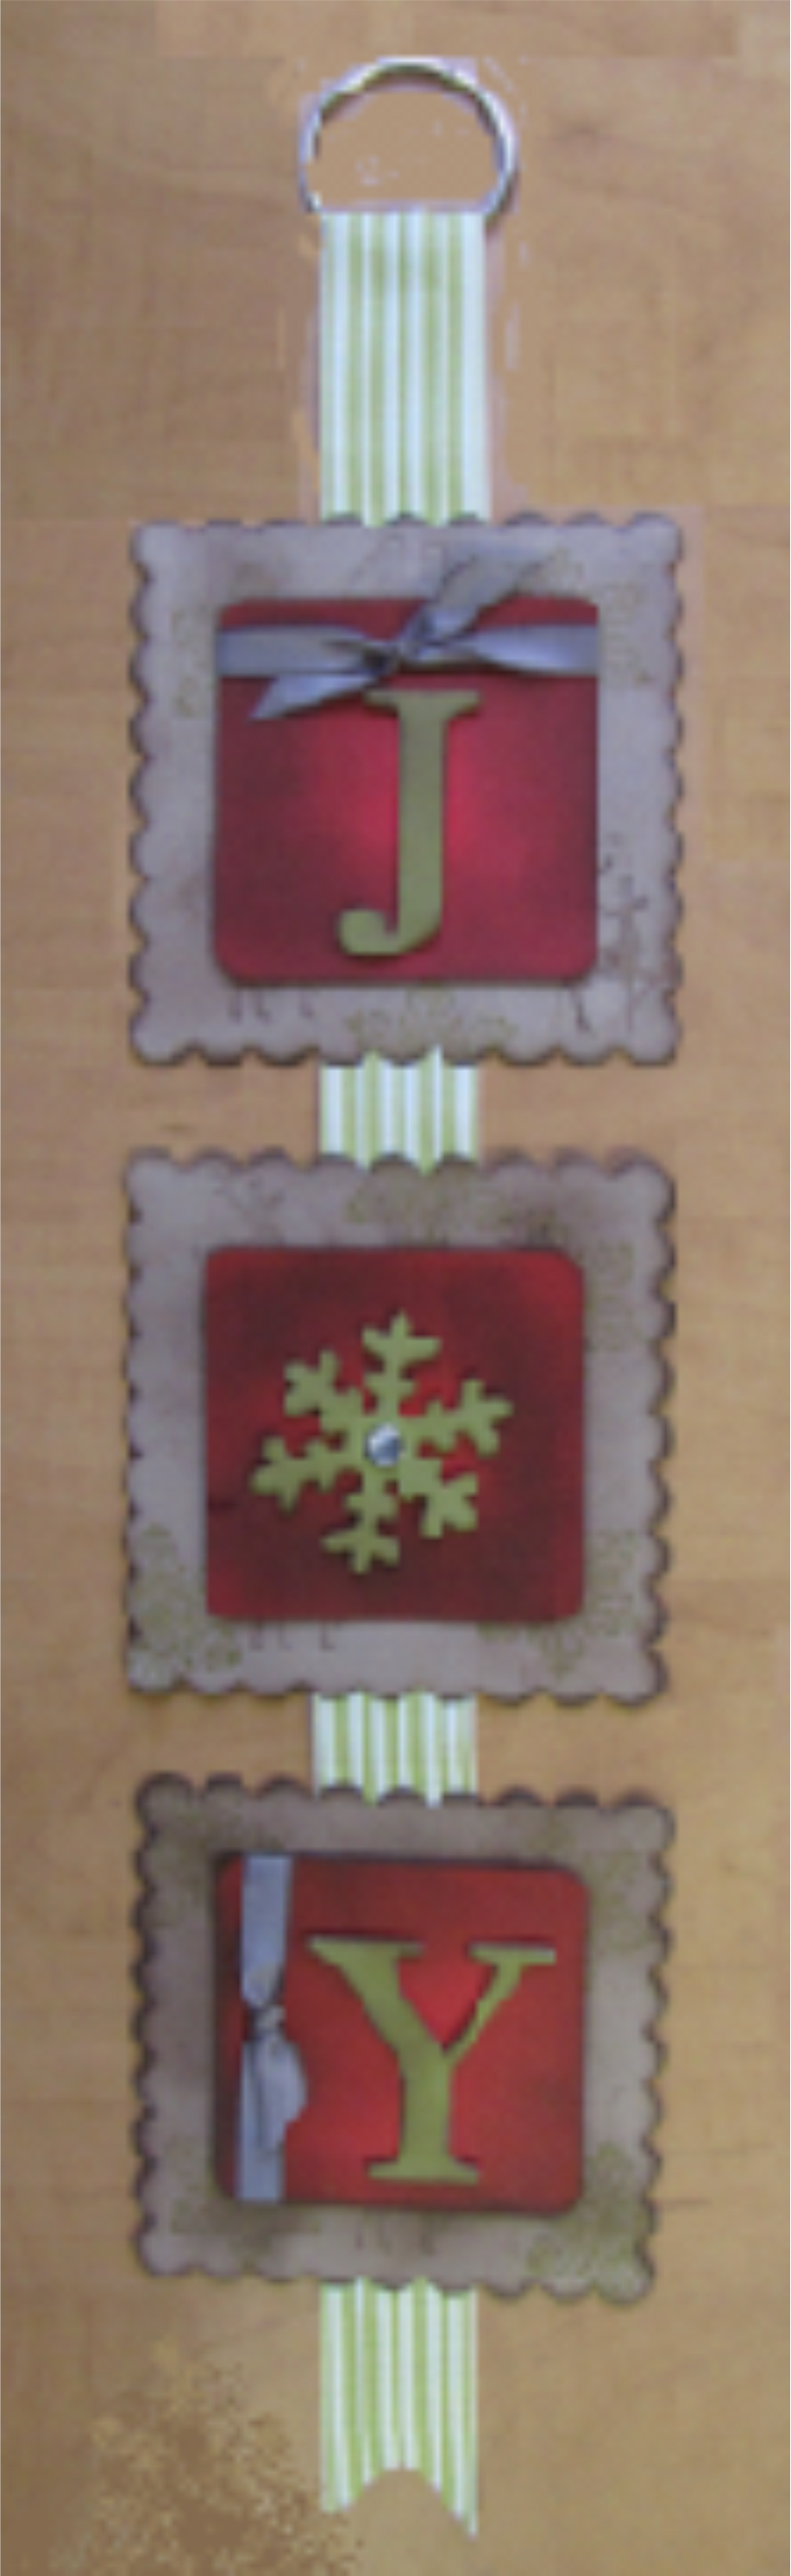 Christmas Crafts - JOY Hanging Banners